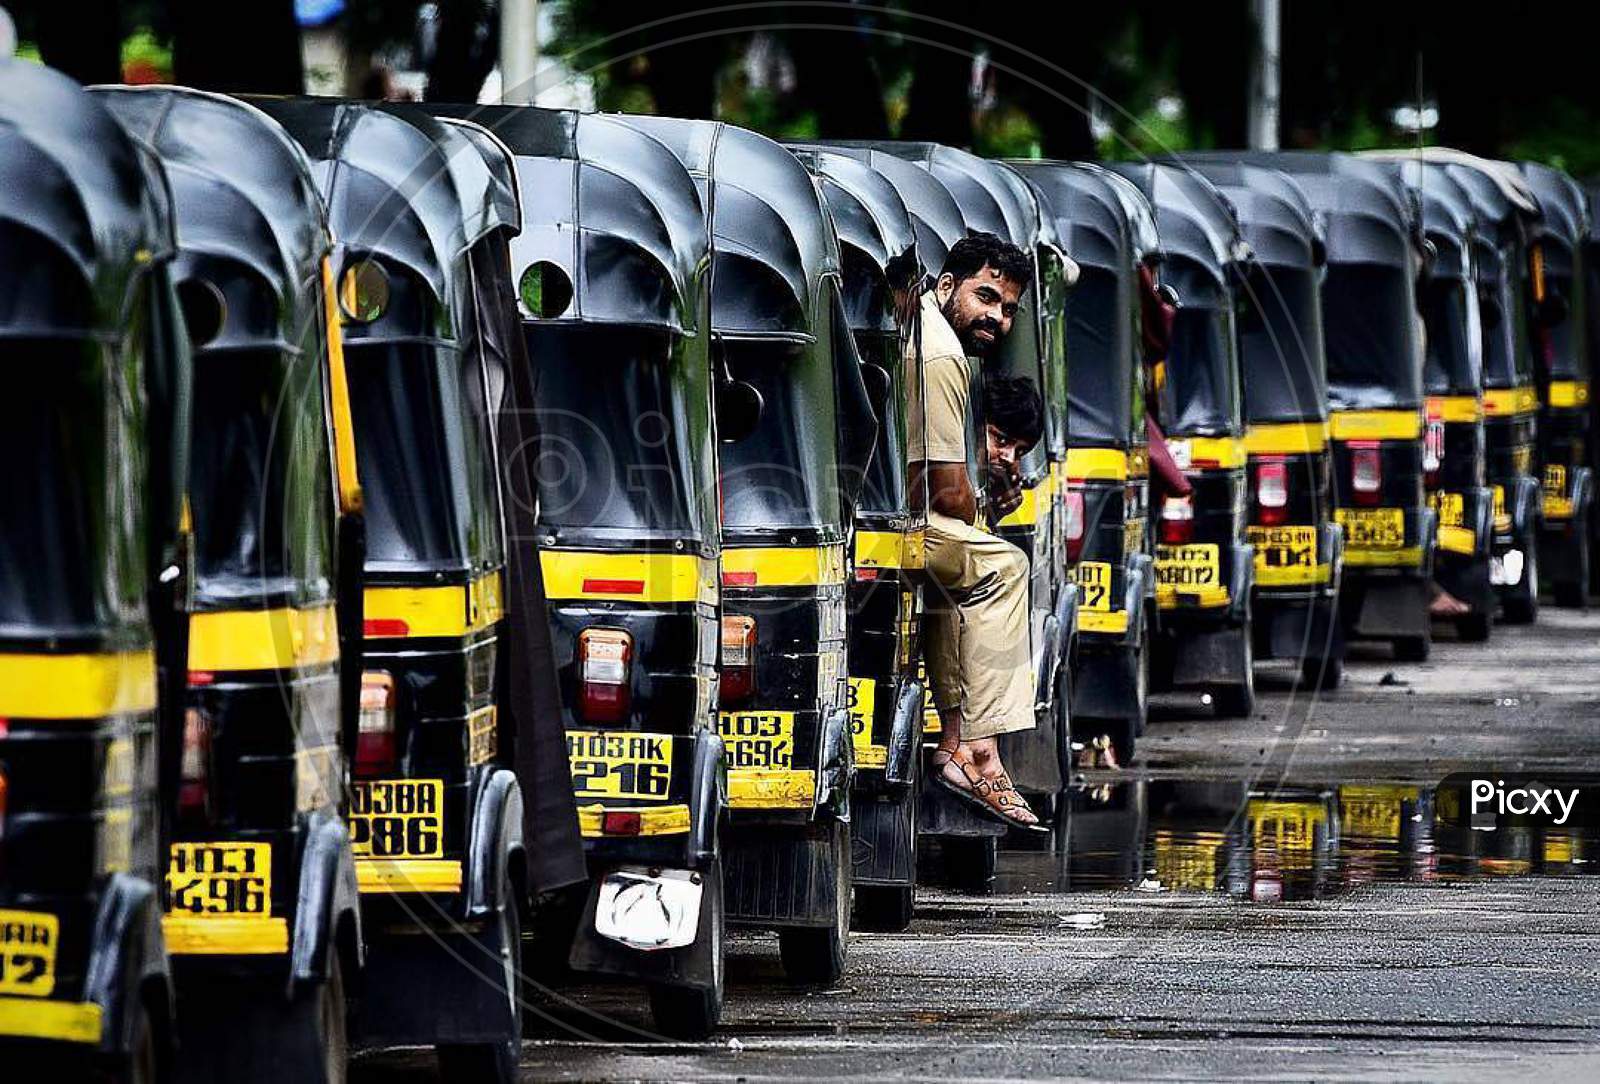 Auto rickshaws in line are parked parallel to one another